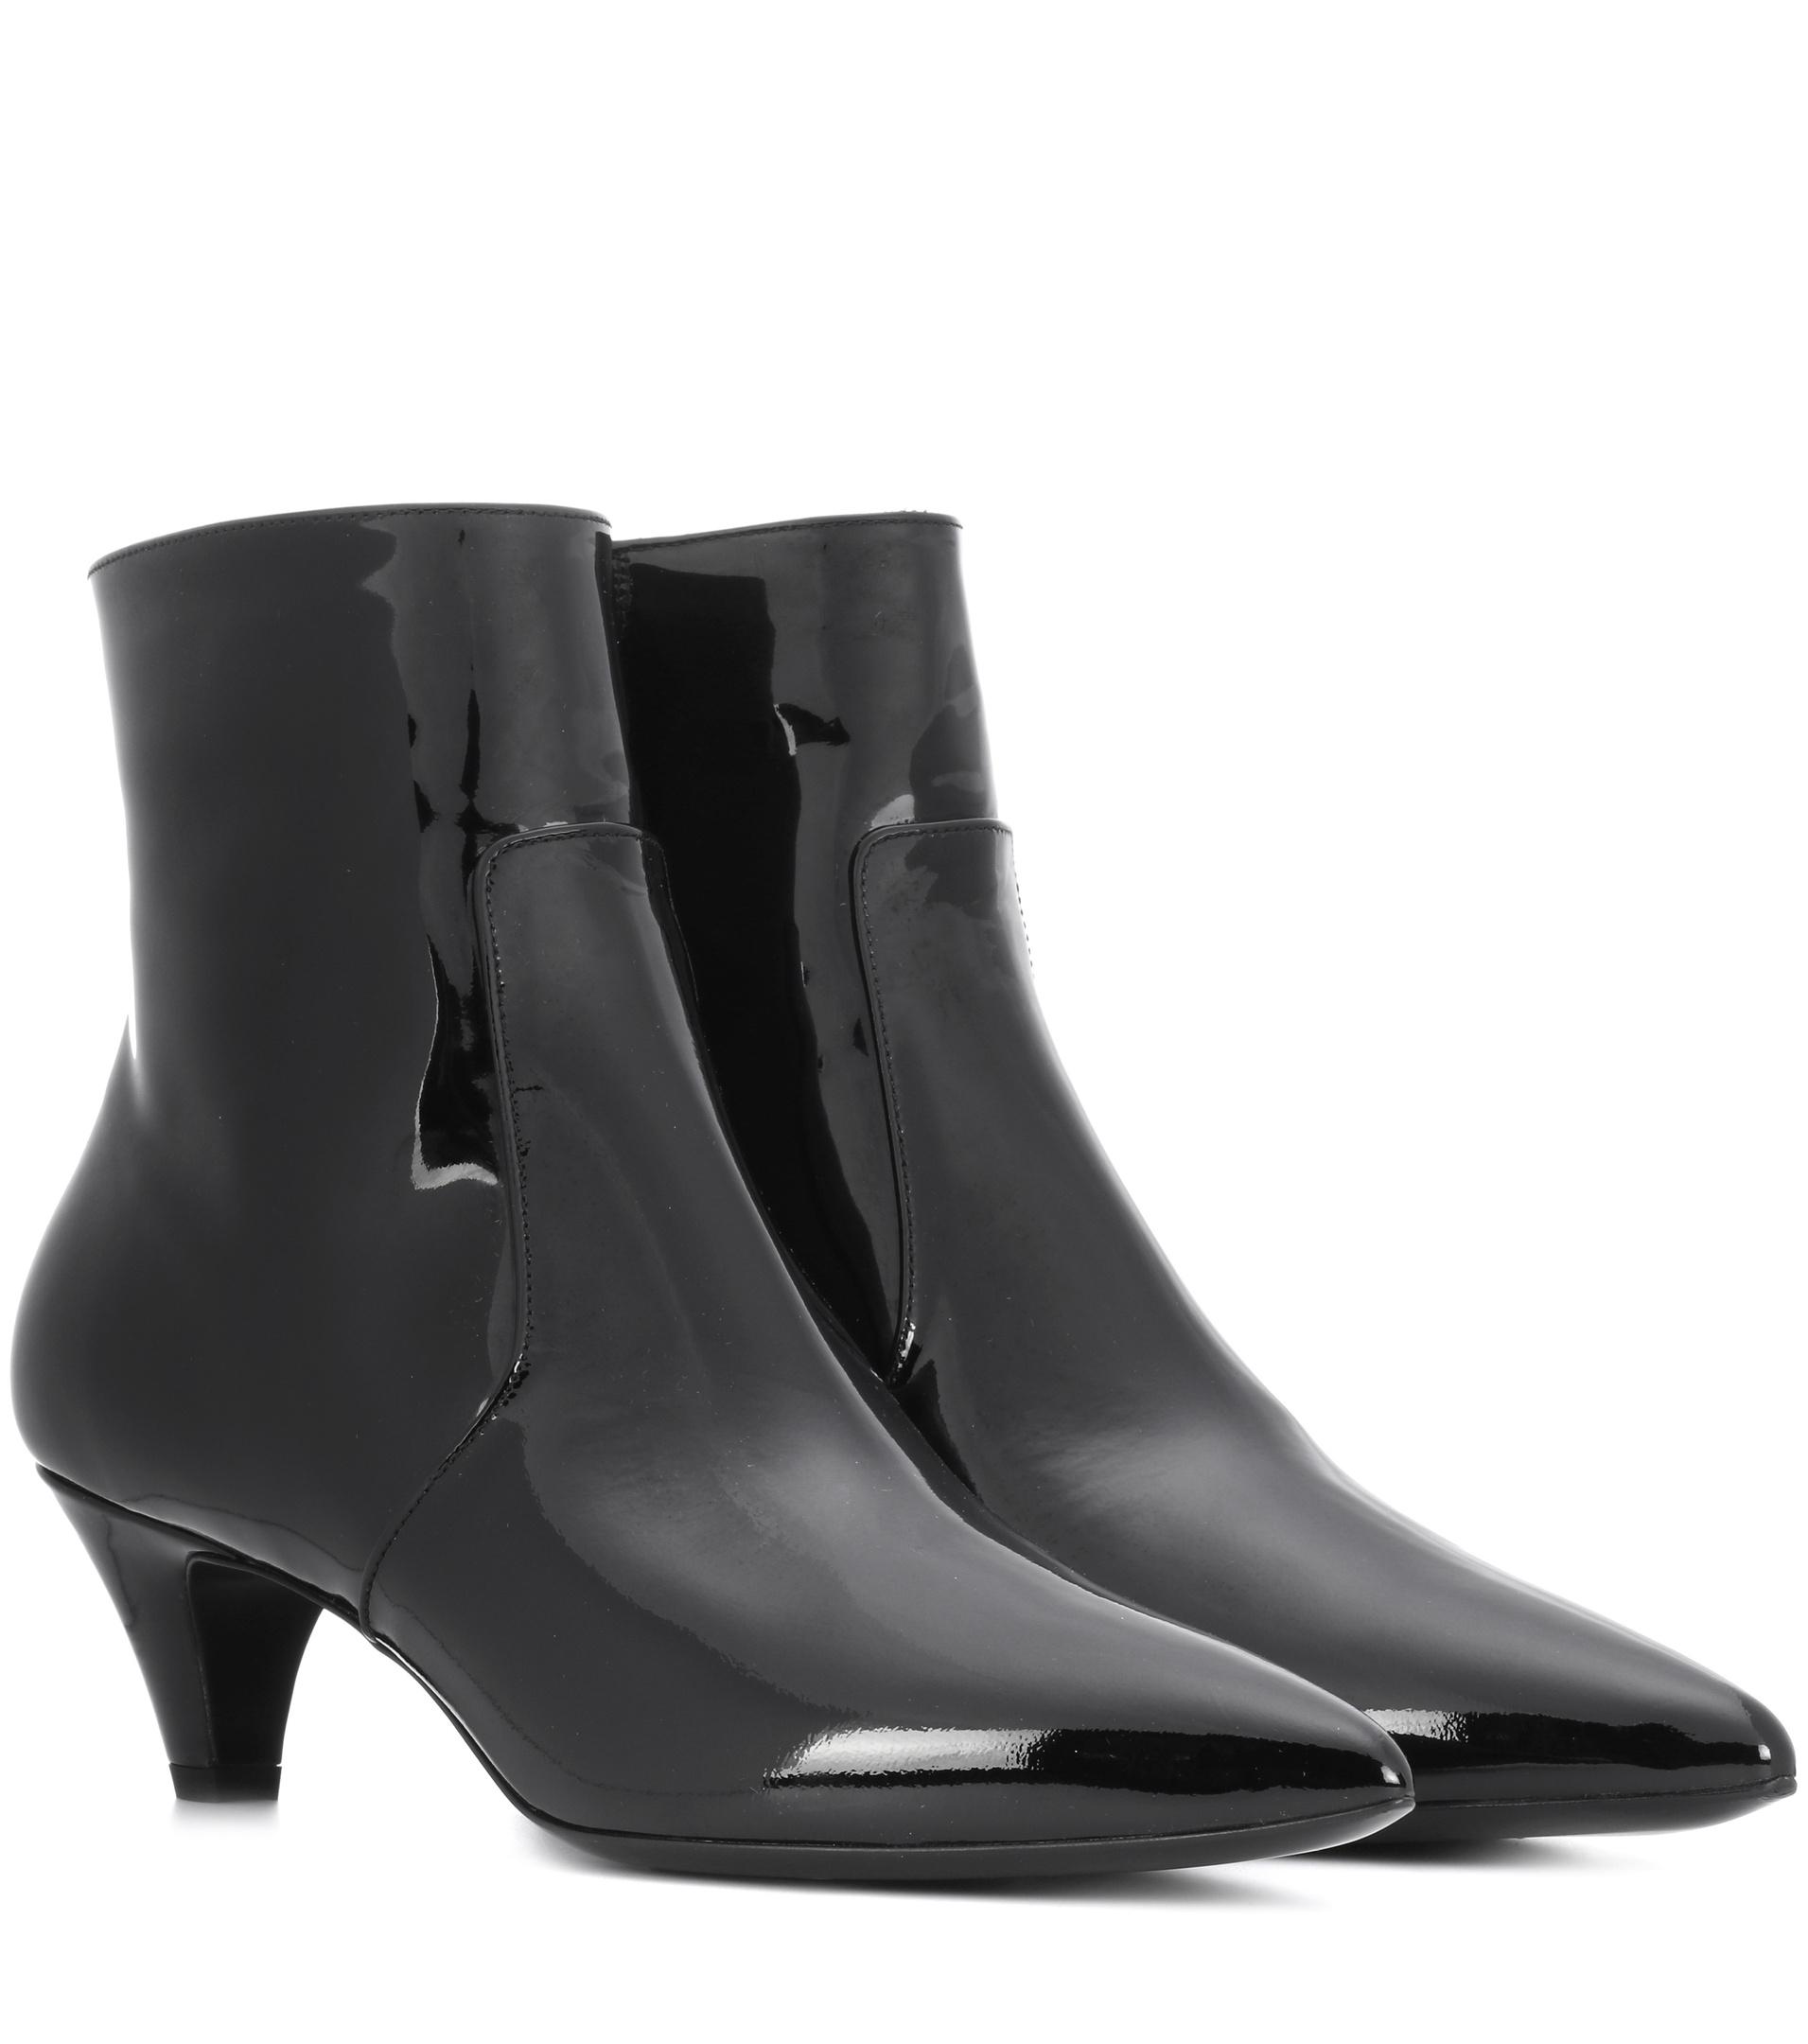 CALVIN KLEIN 205W39NYC Kat Patent Leather Ankle Boots in Black - Lyst